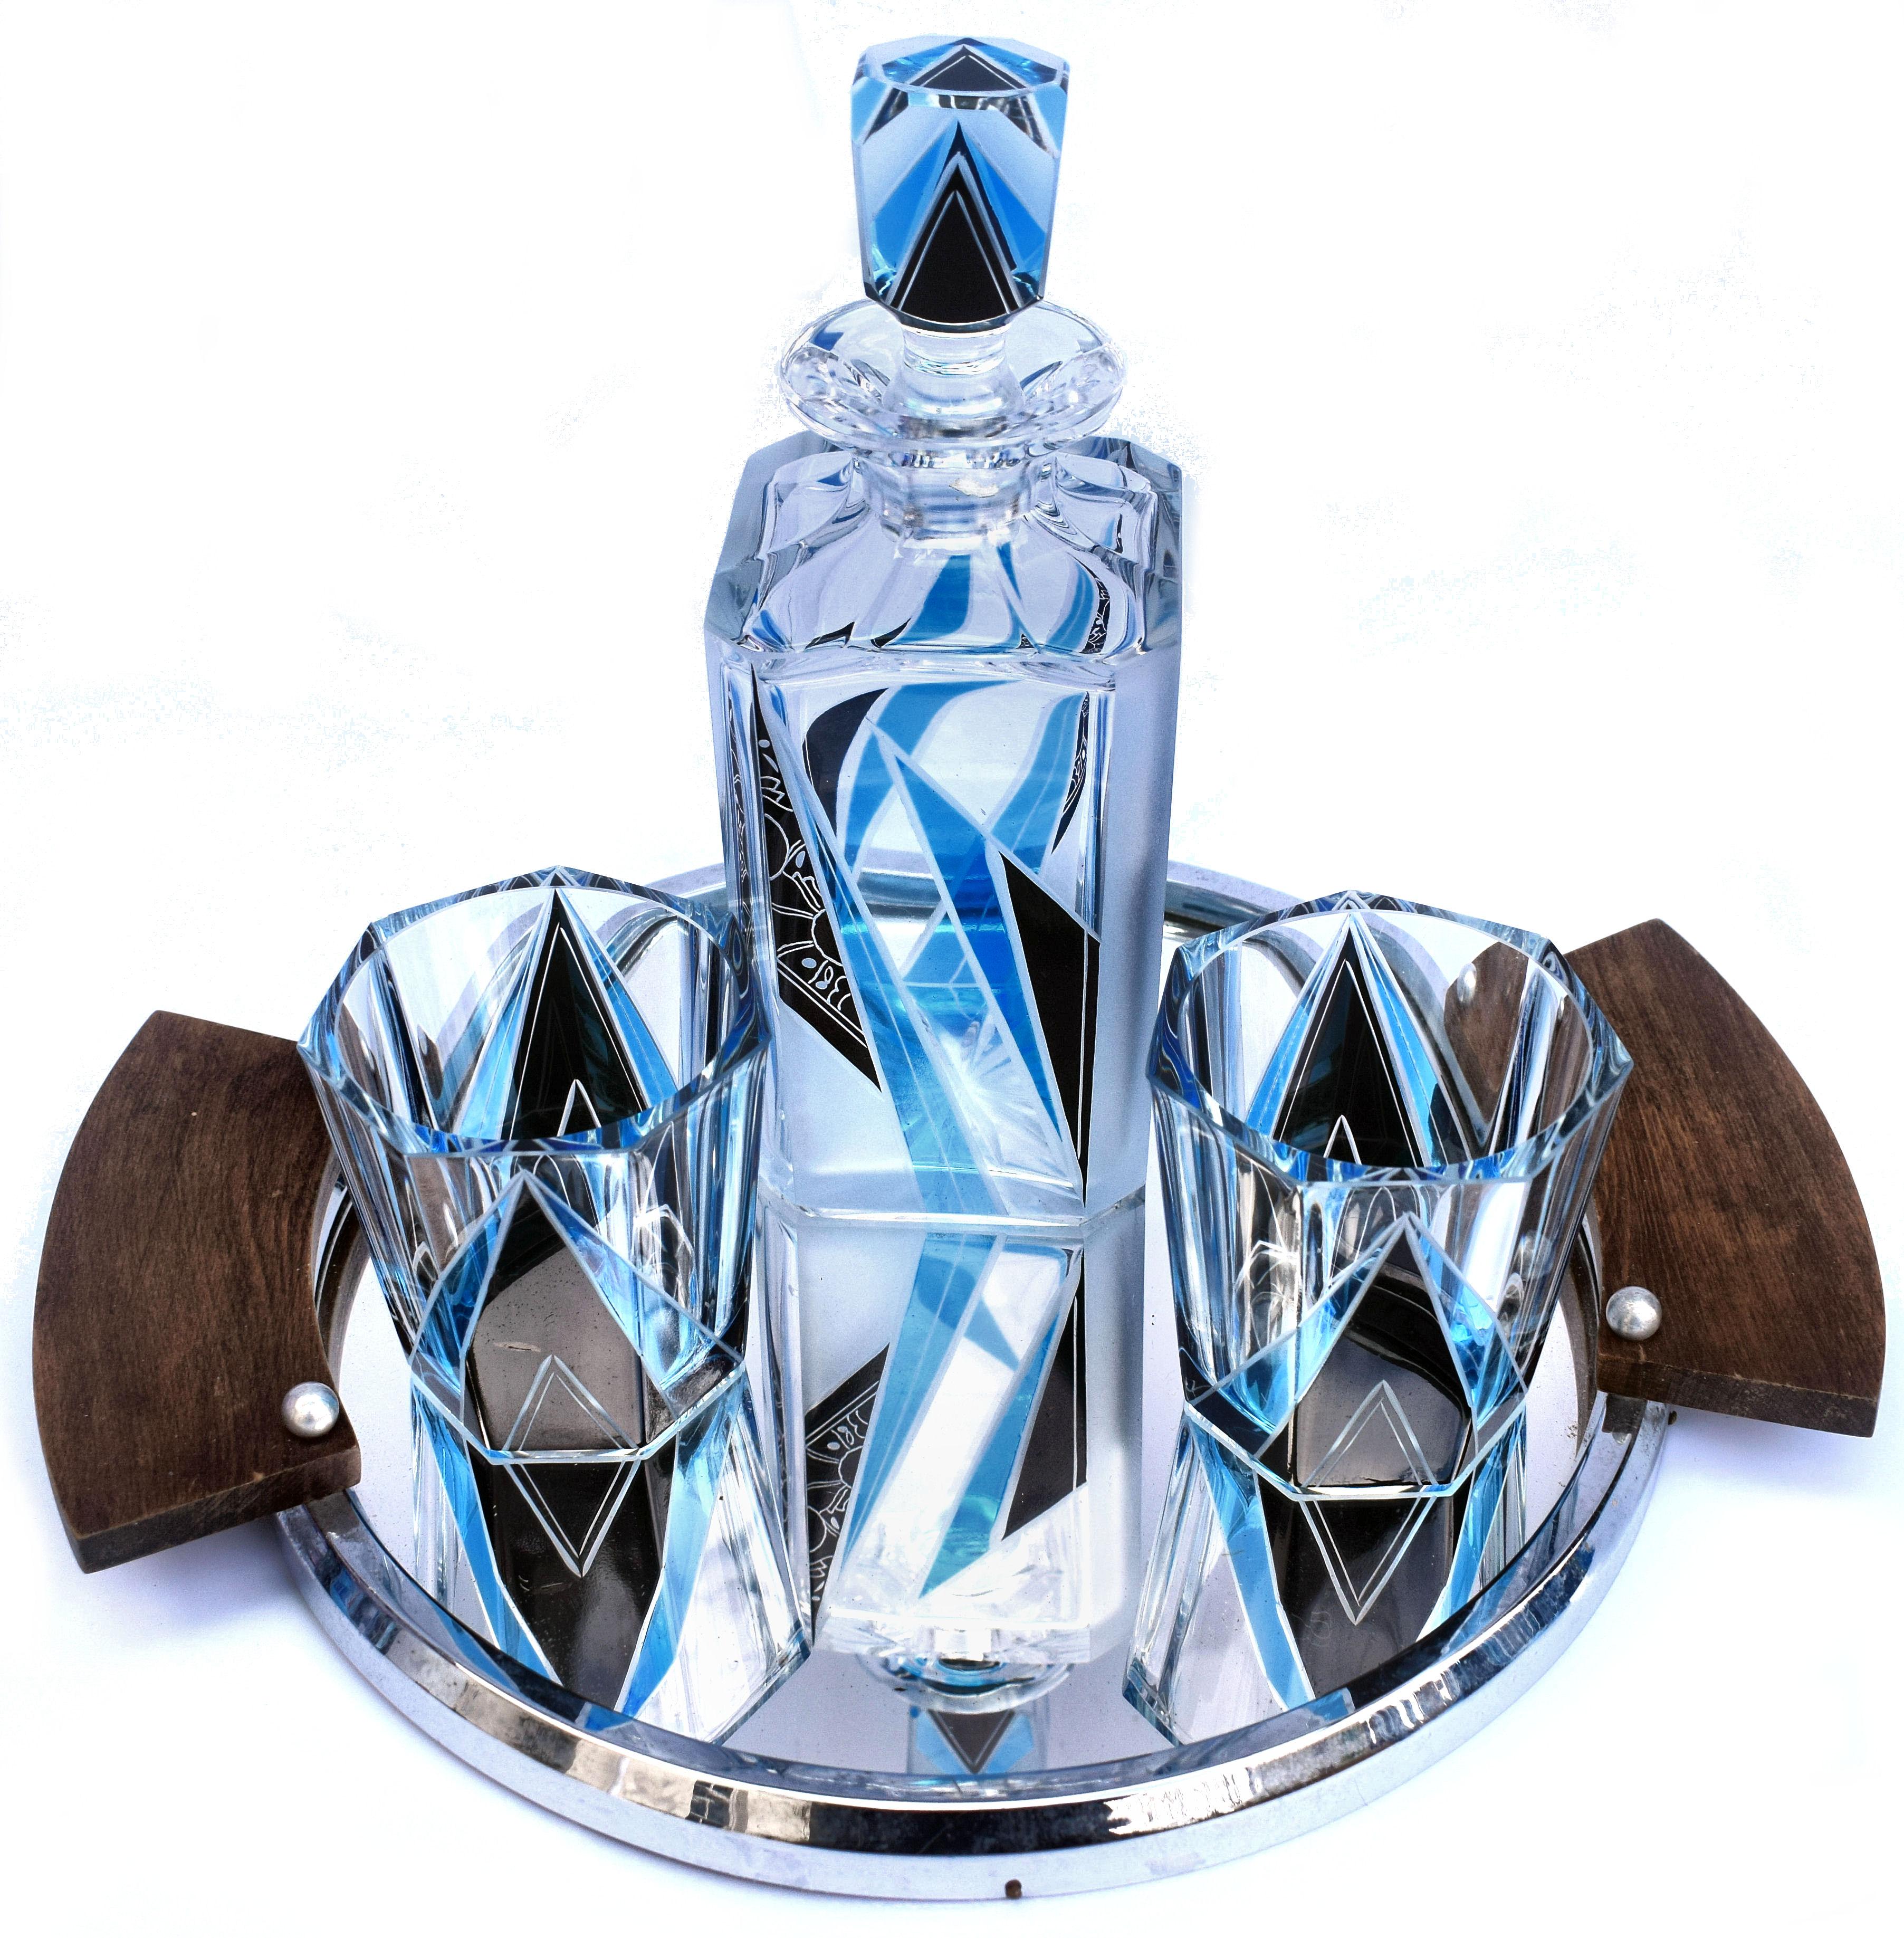 Very high quality, collectable 1930s Art Deco Czech whisky decanter set in heavy cut glass. Originating from Czech Republic this striking set has a very desirable geometric pattern in a rich blue with black overlay enamel decoration. No chips,